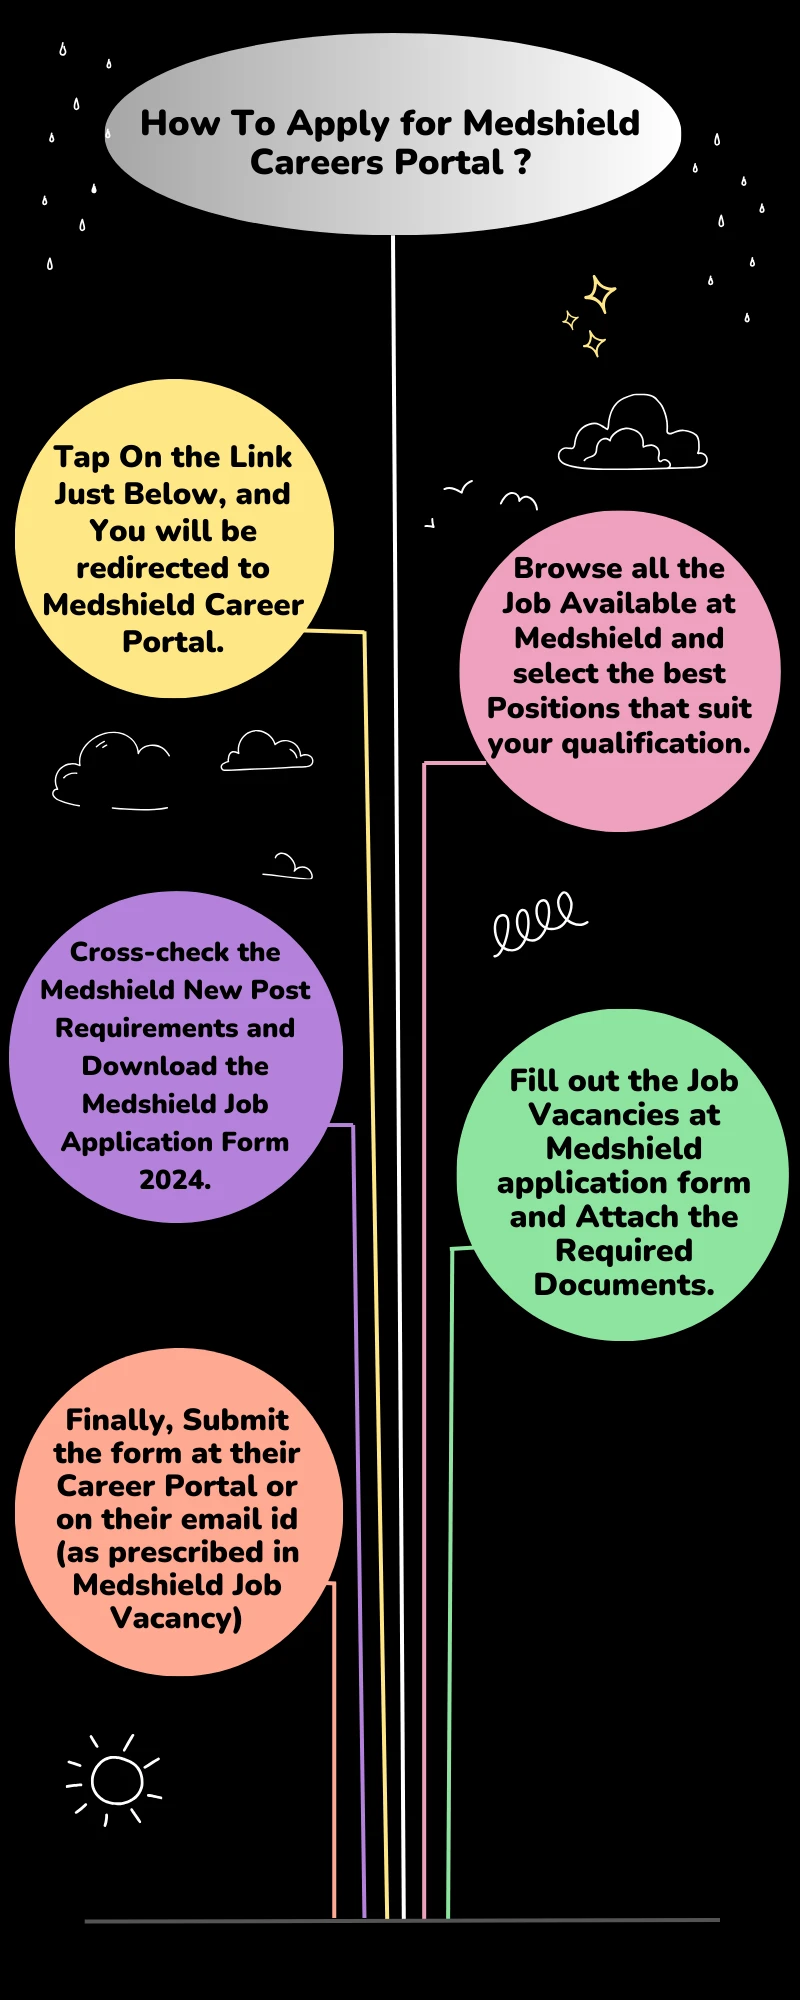 How To Apply for Medshield Careers Portal ?